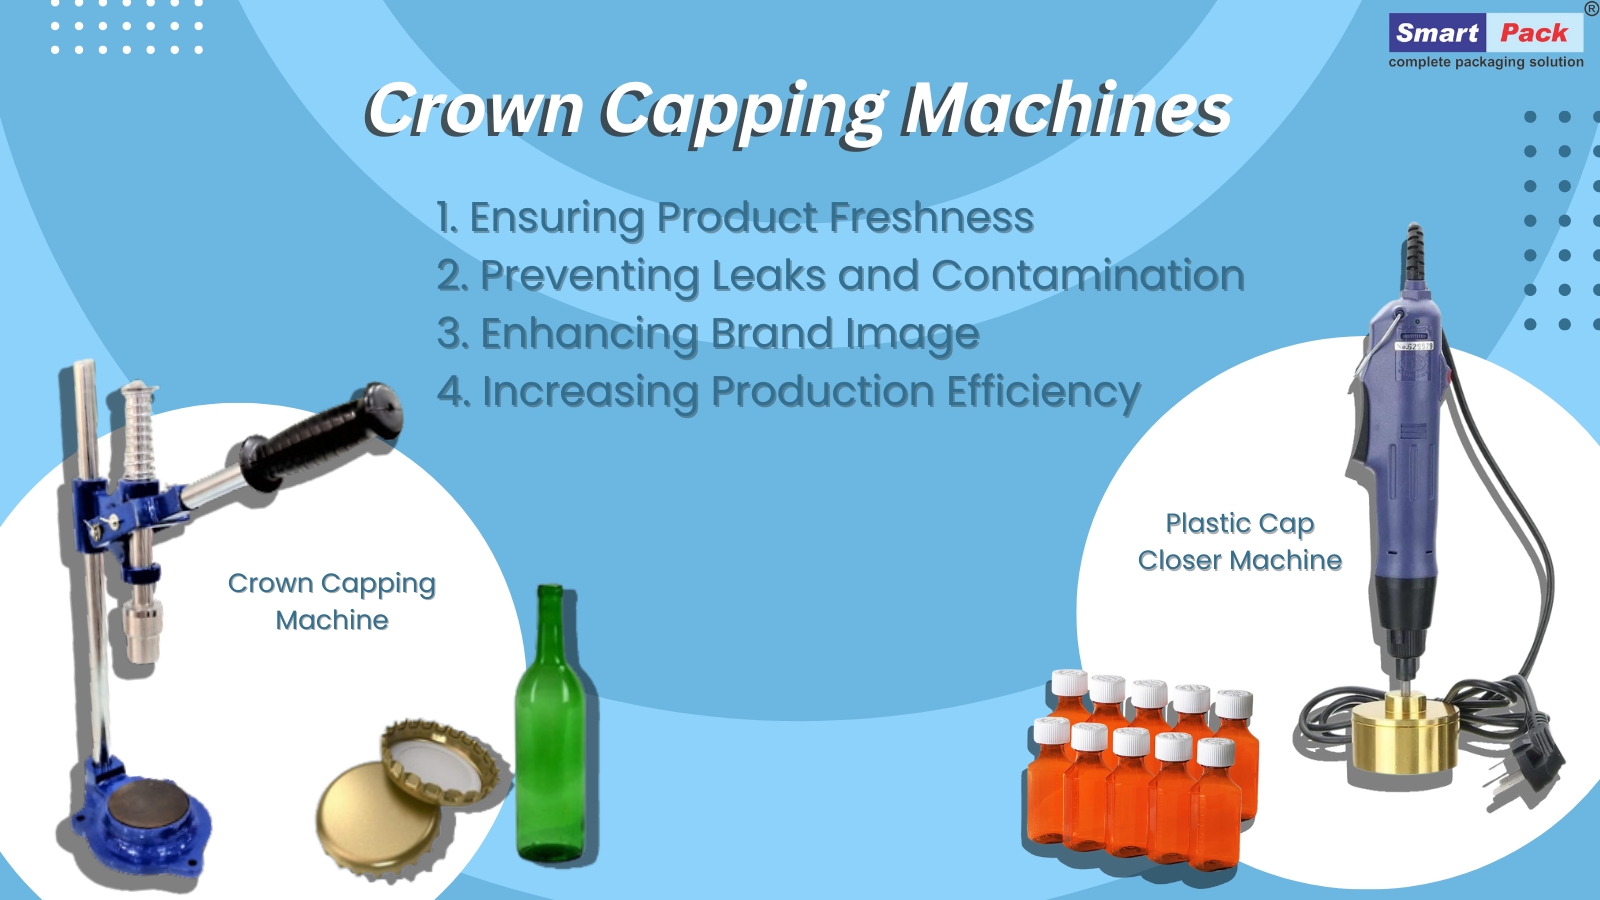  What Exactly is a Crown Capping Machine?